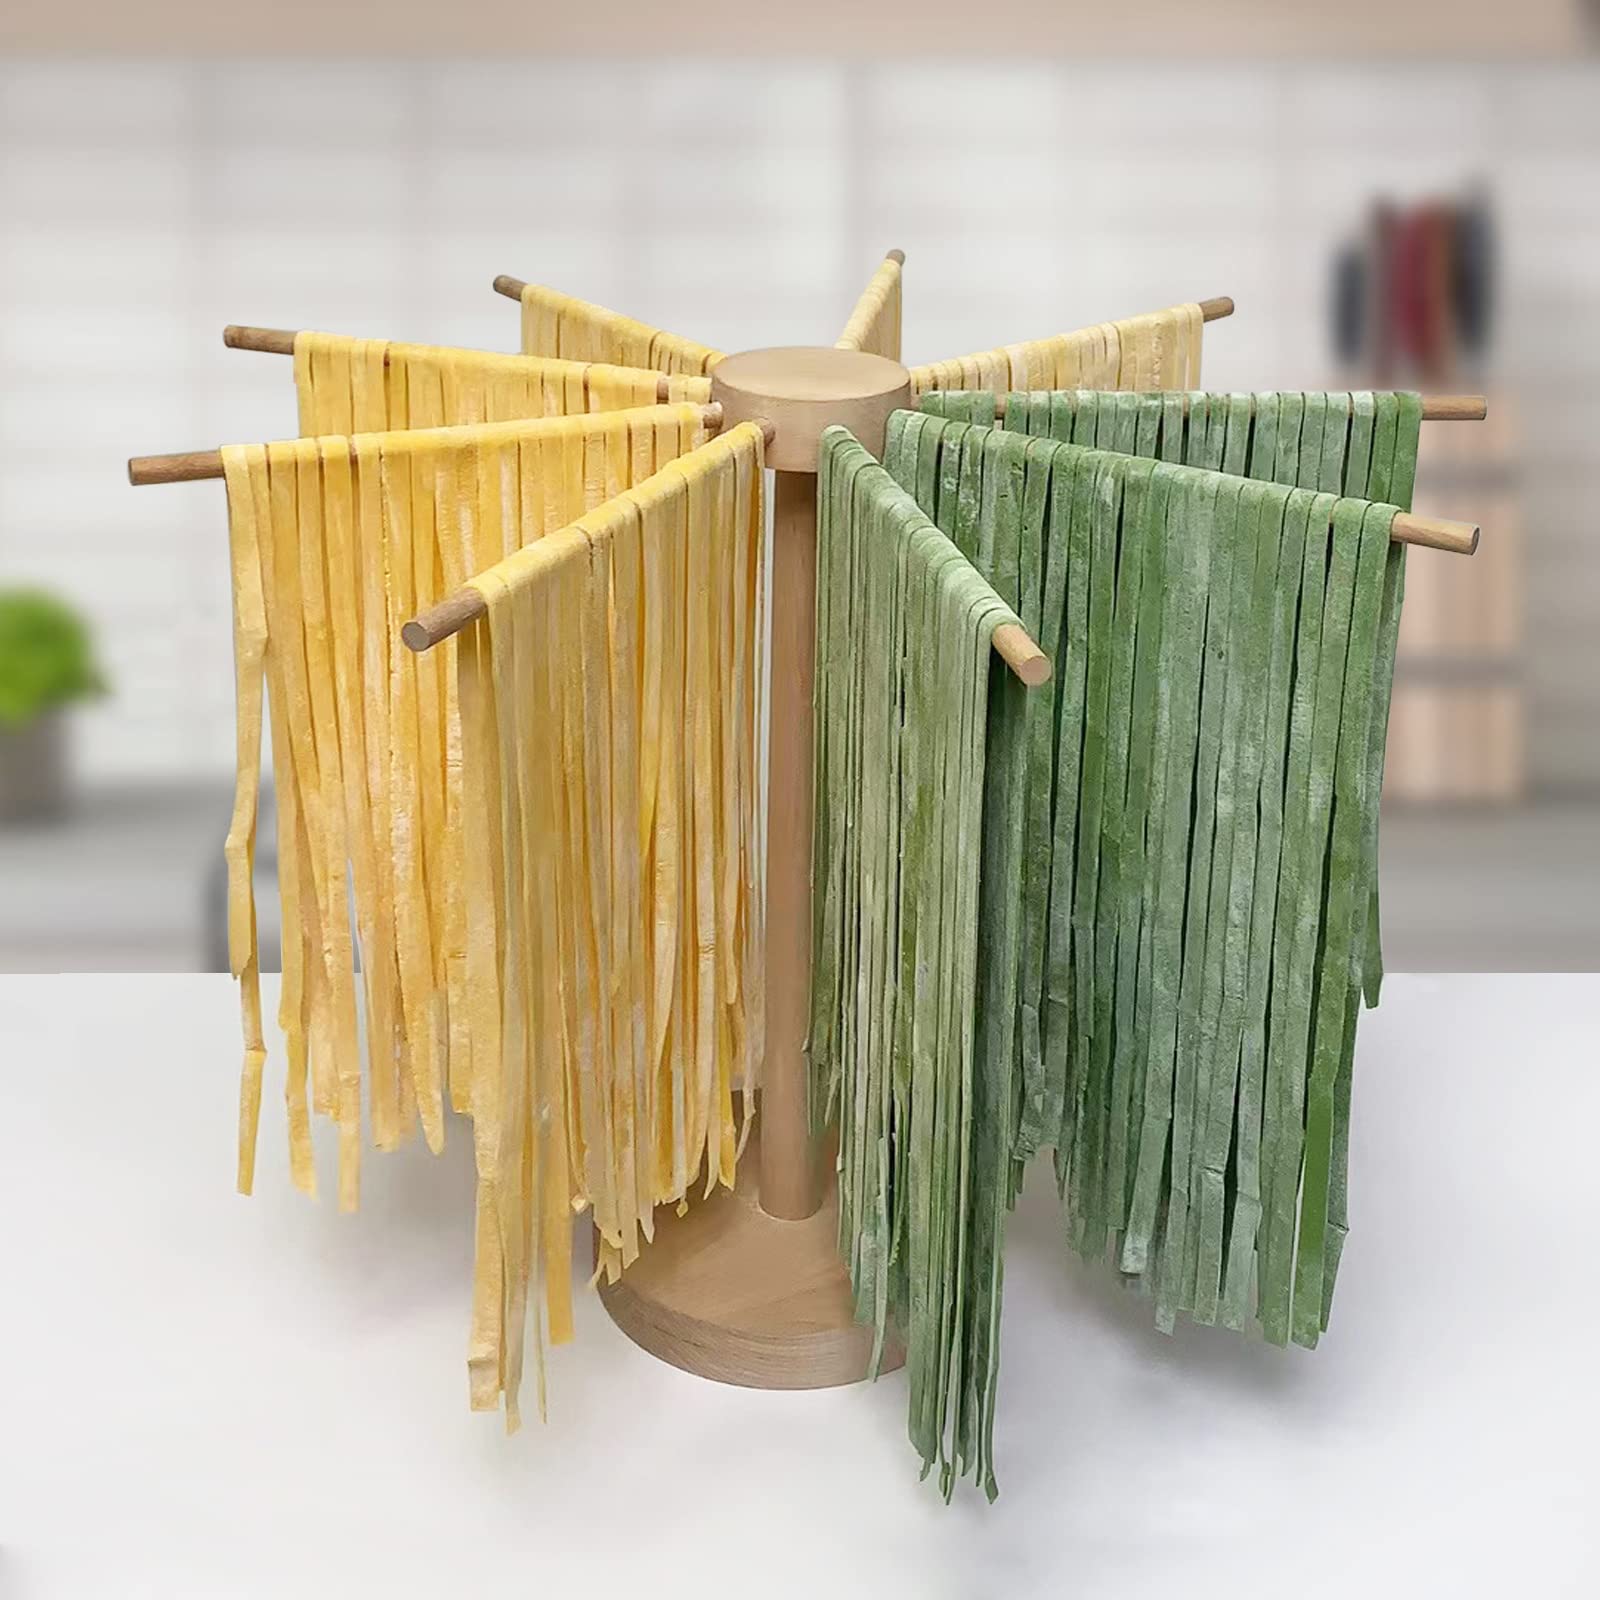 Pasta Drying Rack, Large Wood Pasta Rack Collapsible for Fresh Pasta Noodle Spaghetti Dryer Hanger Stand